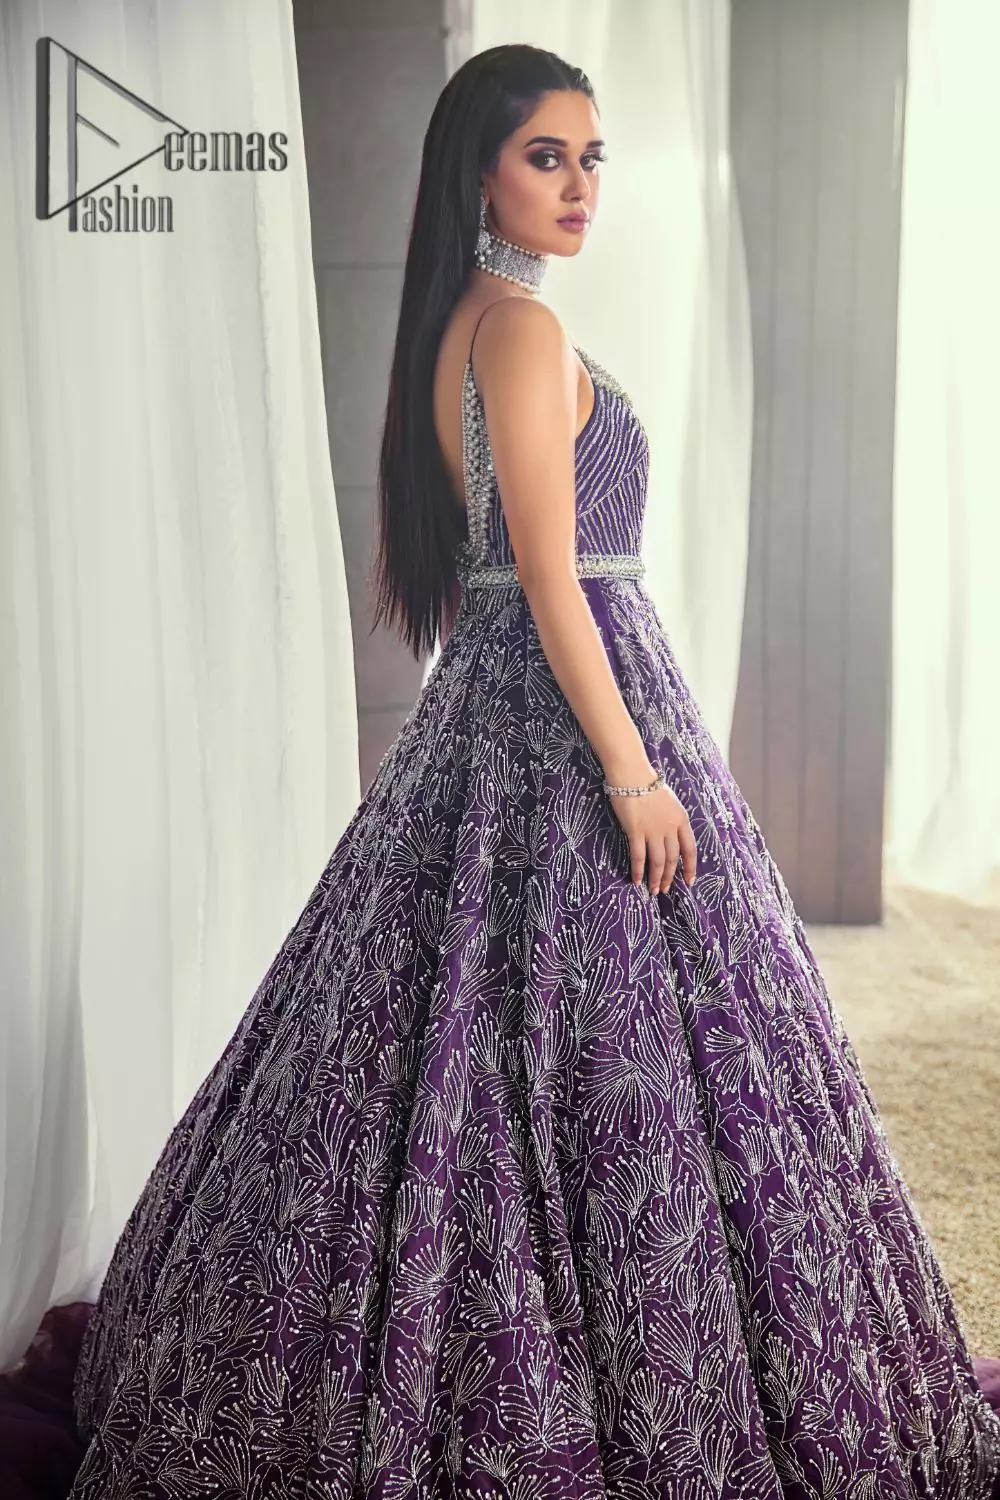 Style with an unparalleled ravishing, by picking the right dress for you. Evening parties being full of entertainment are maxed up with gratification if your dress wins you the most admirers. This sleeveless Purple Frilled Maxi has the magical features to make you an evening star. Decorated with silver embroidery, and  its stunning boat-shaped neckline suits its highly enchanting silver embroidery. This Maxi is designed from 100% pure Organza Stuff that gives you artistic look on your event.